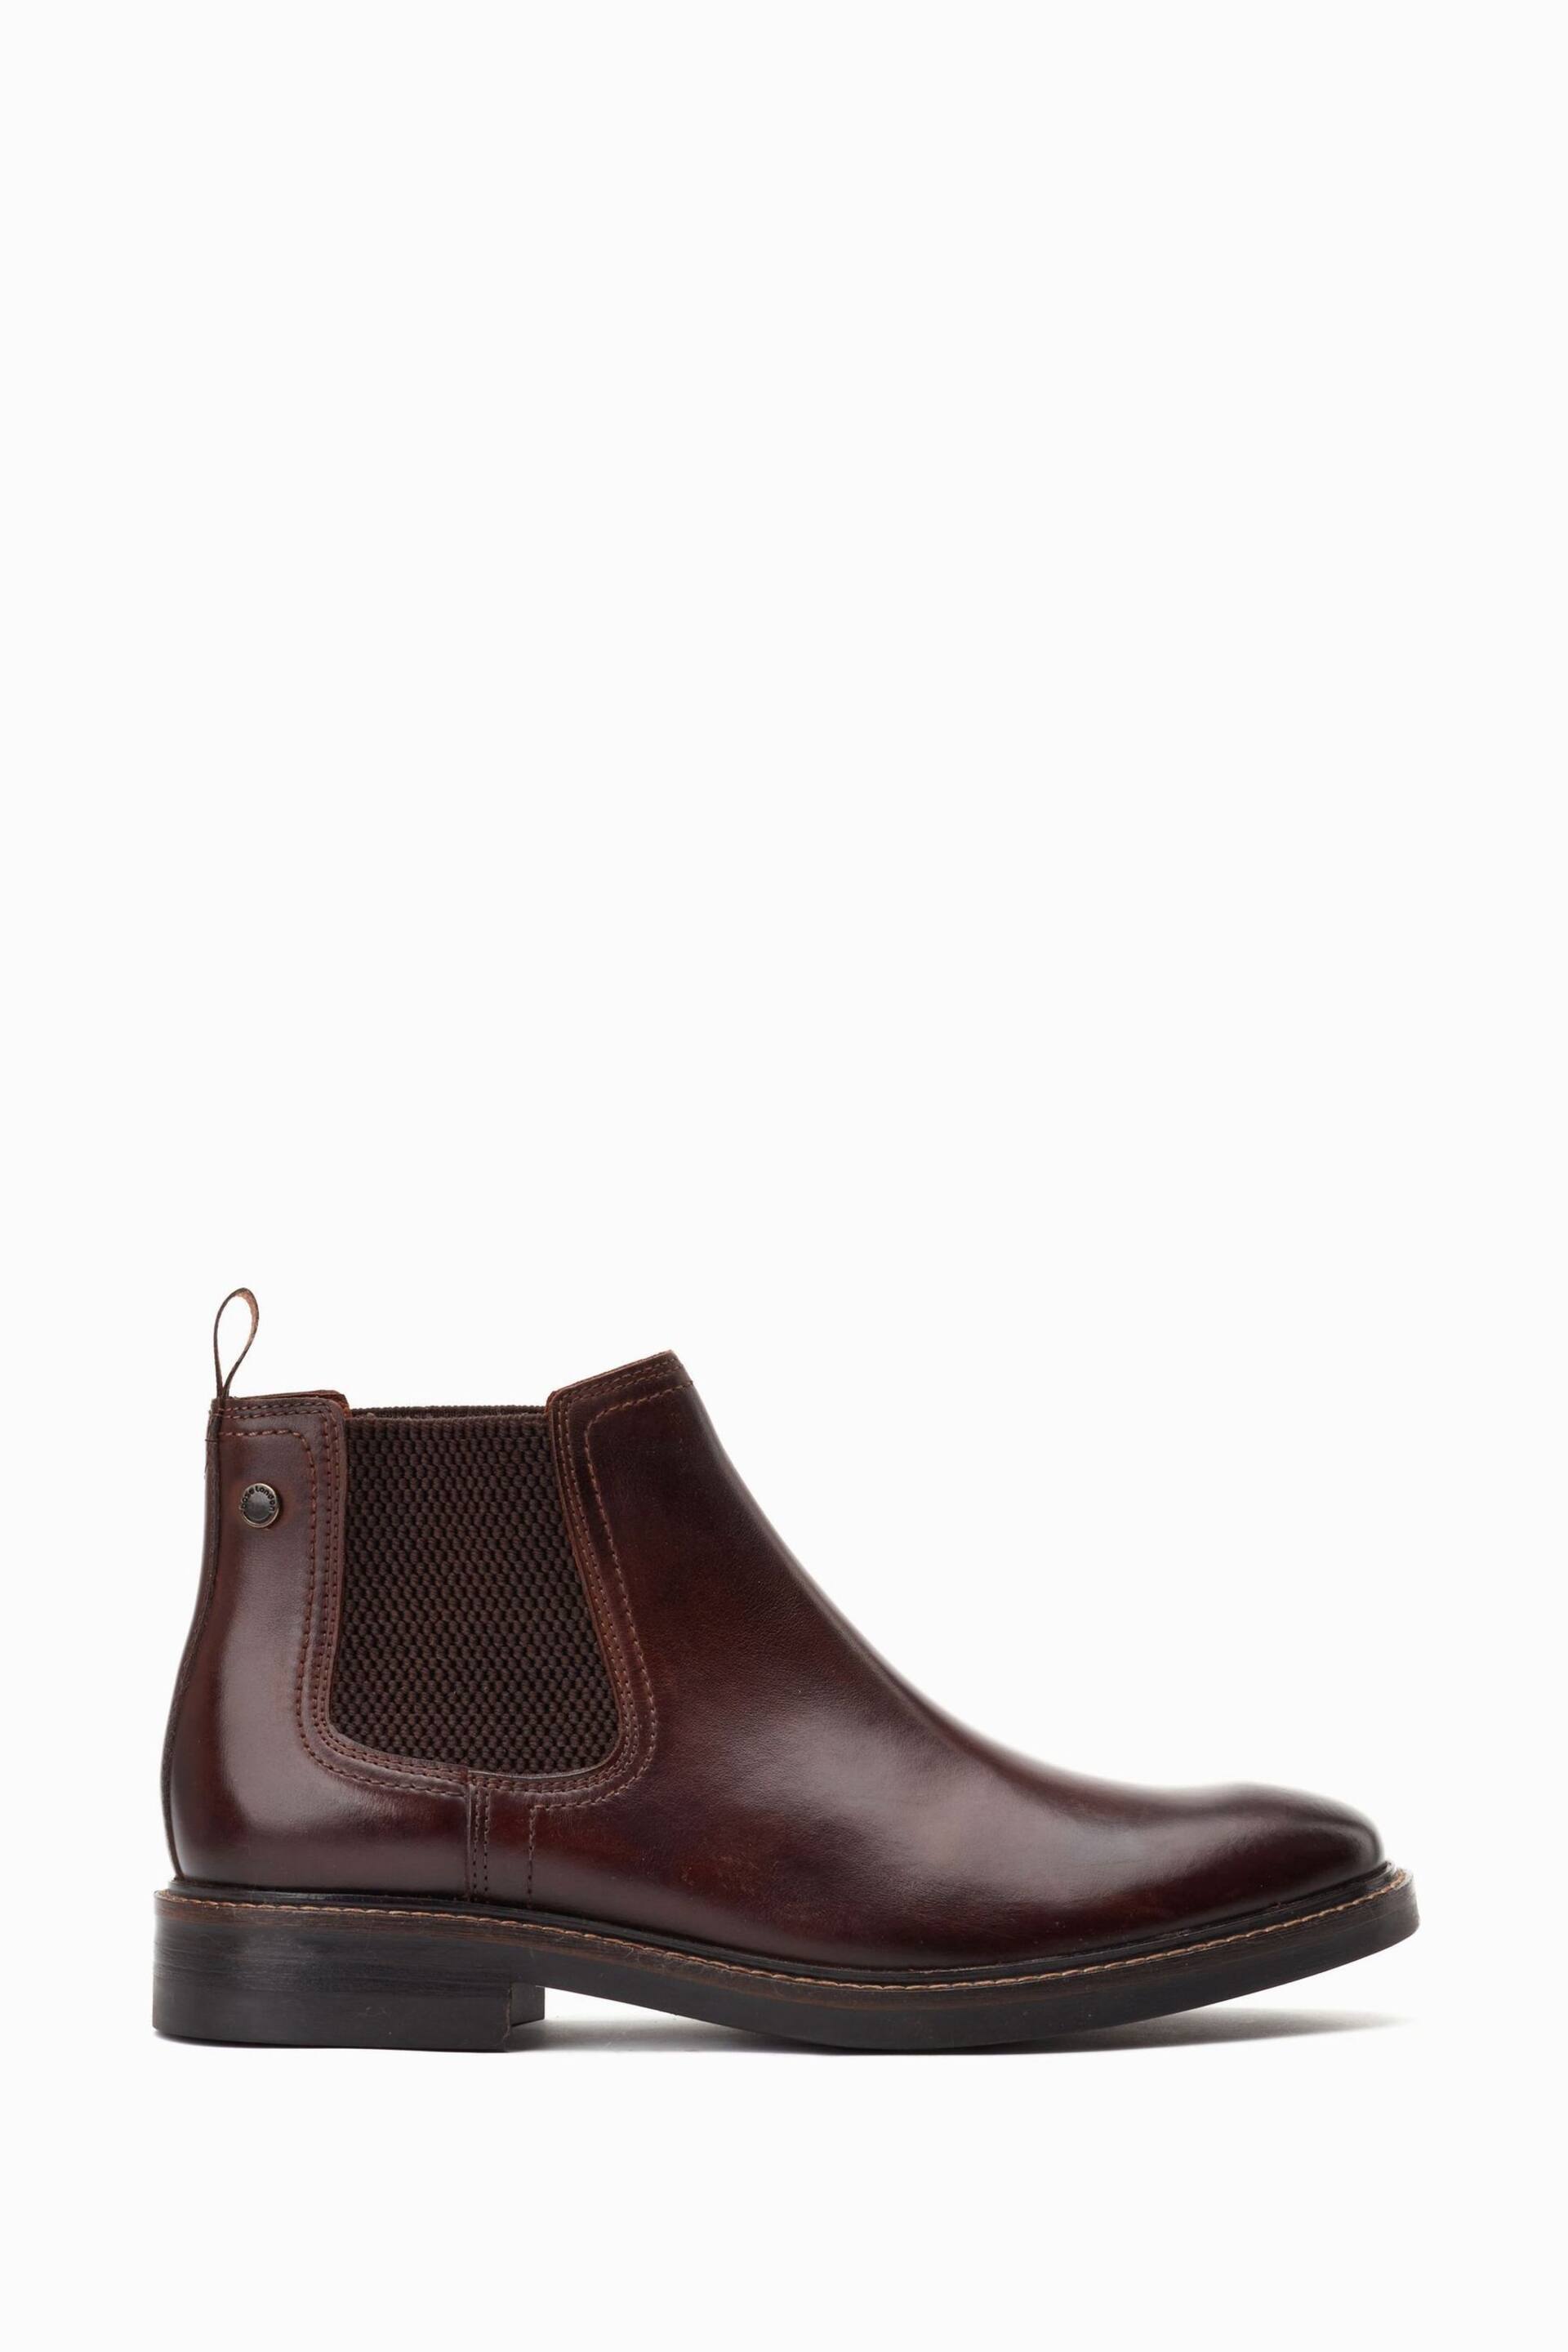 Base London Portland Pull On Chelsea Boots - Image 1 of 6